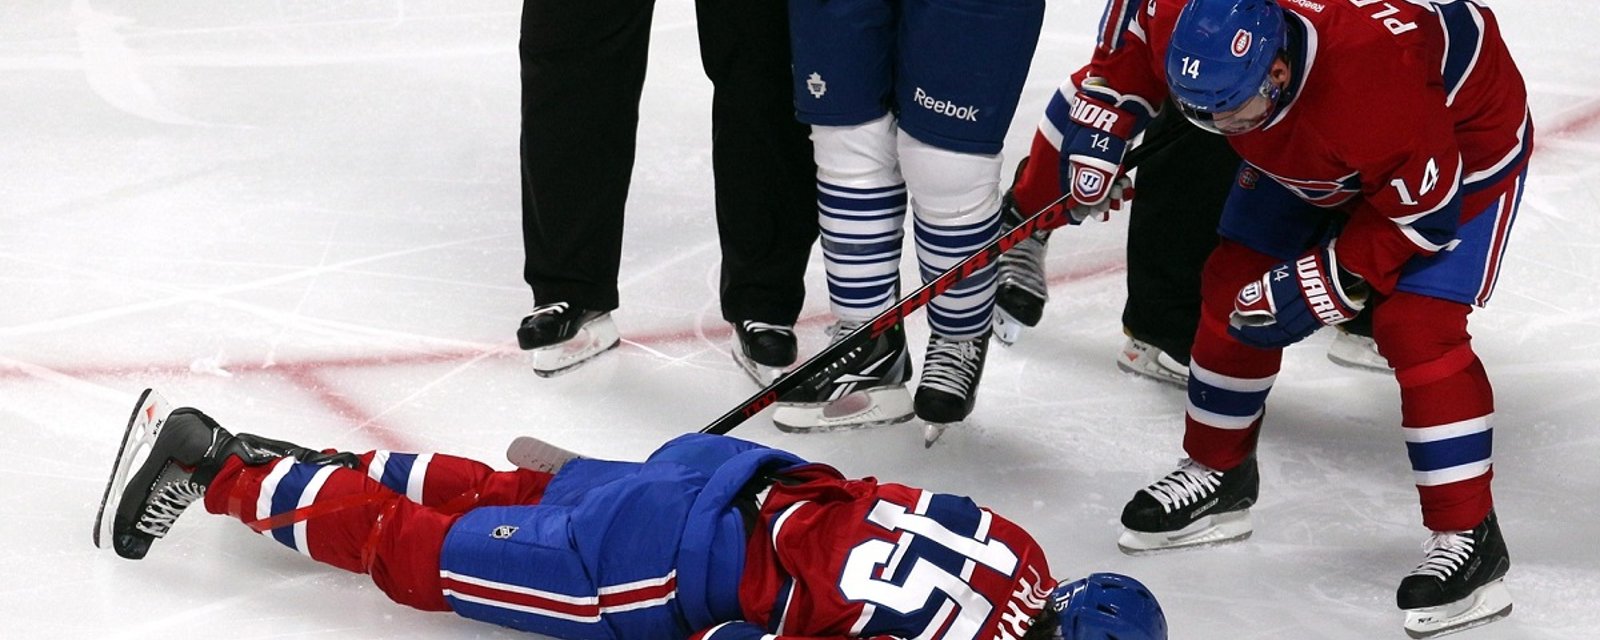 The NHL's new concussion rules won't go over well with some fans.